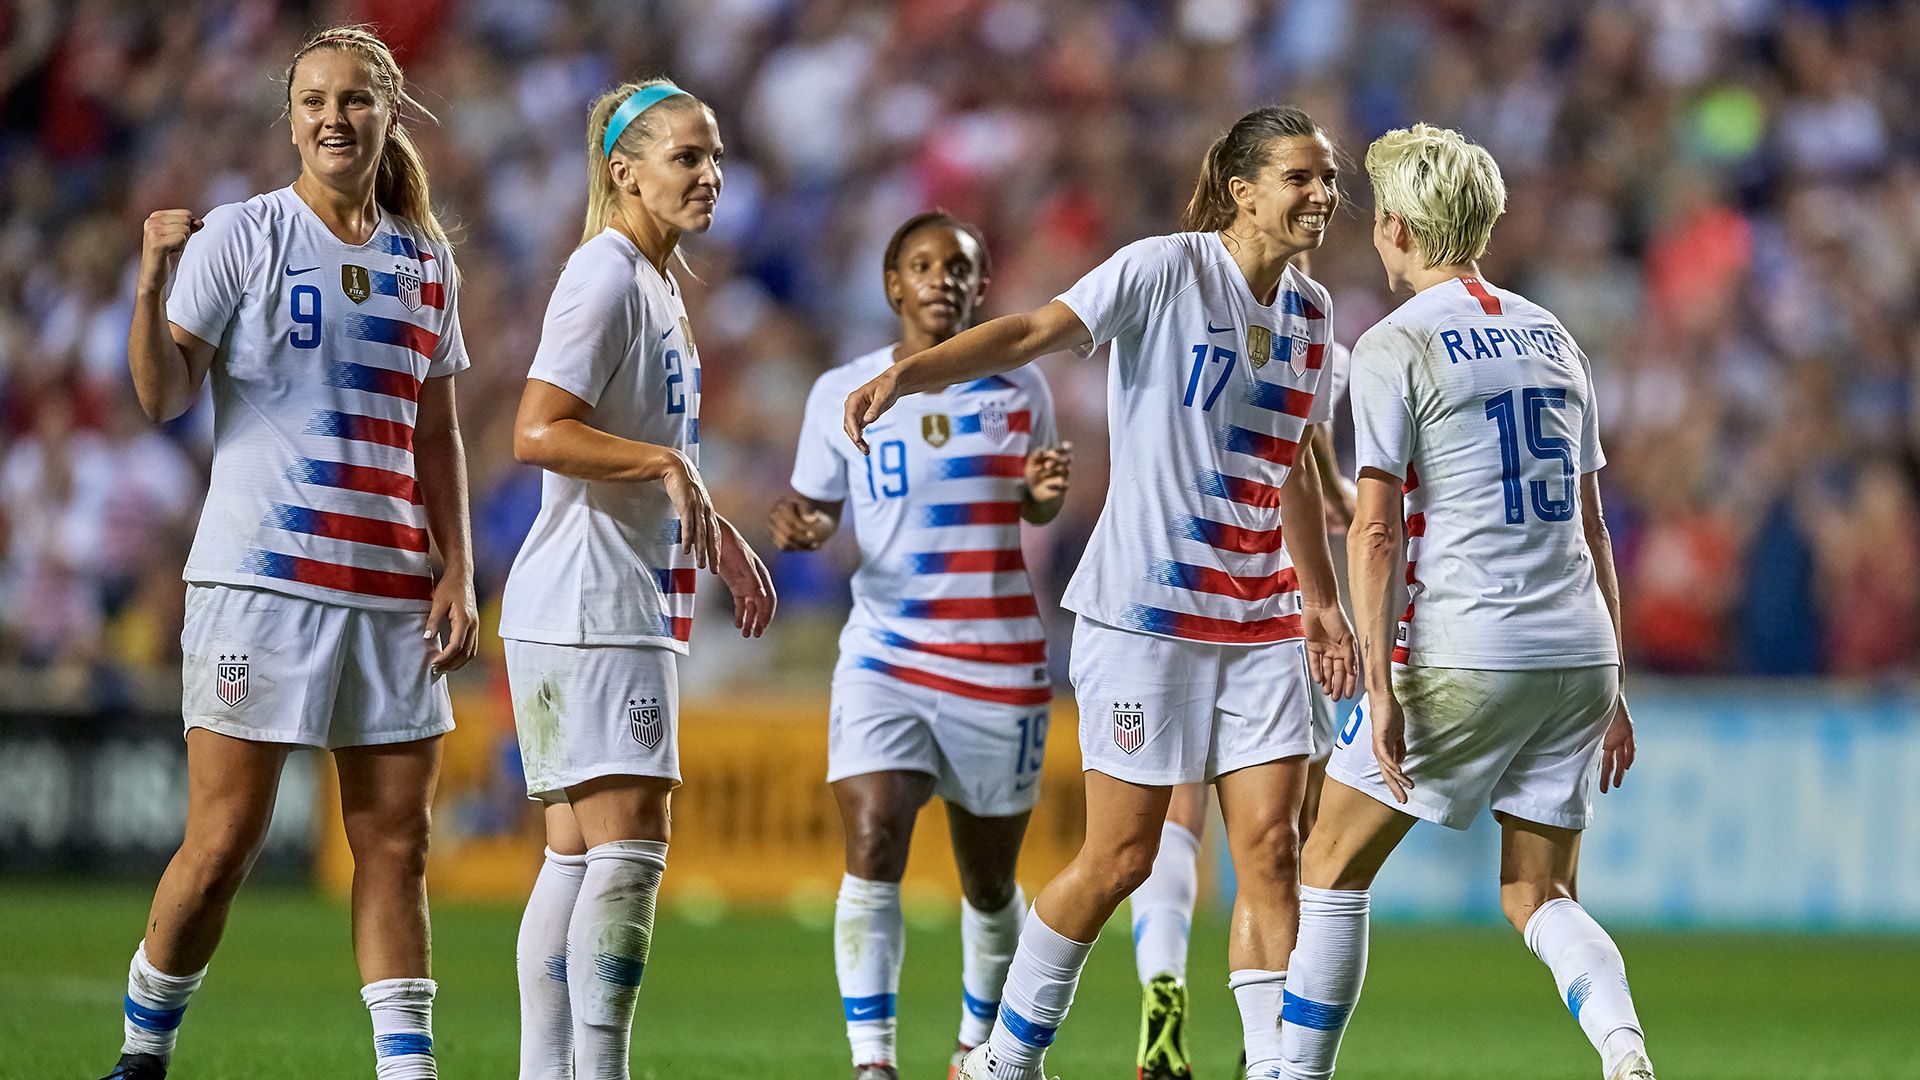 U.S. Names 20 Woman Roster For Concacaf Women's Championship